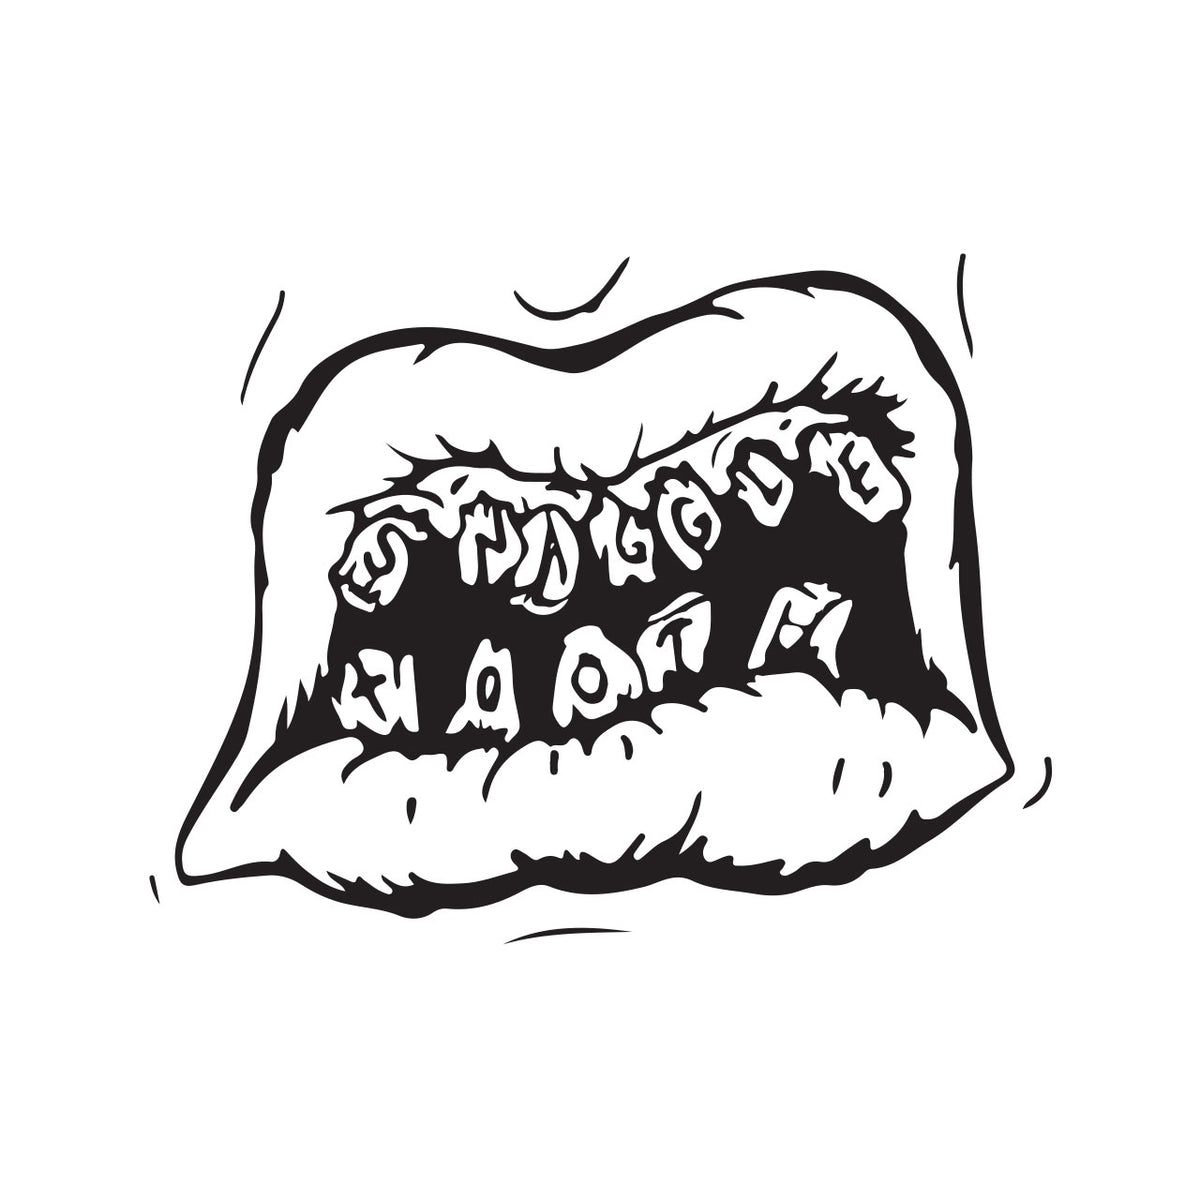 Snaggle Tooth - Made To Order